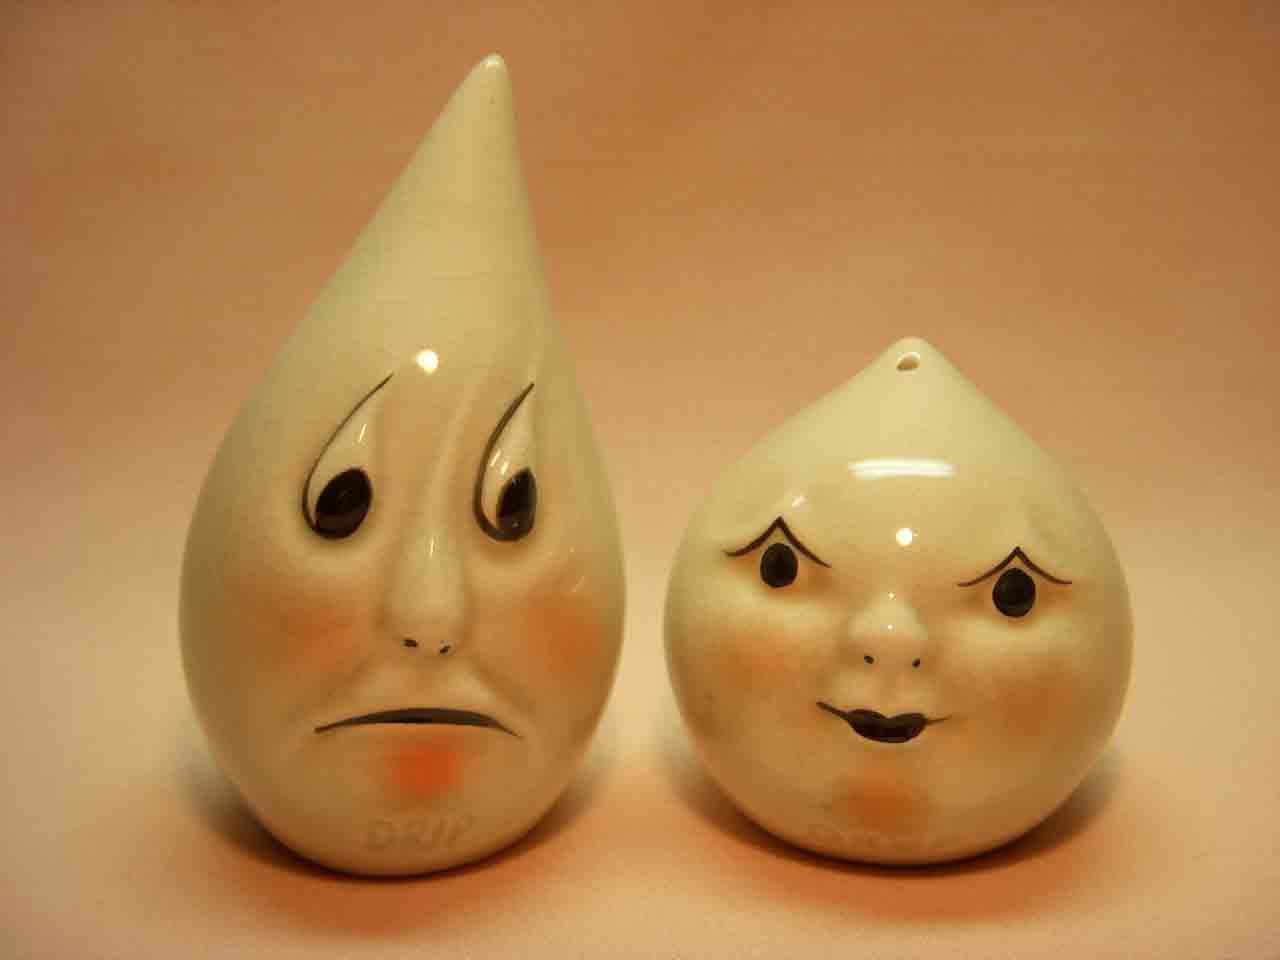 Vallona Starr Drip and Drop salt and pepper shakers